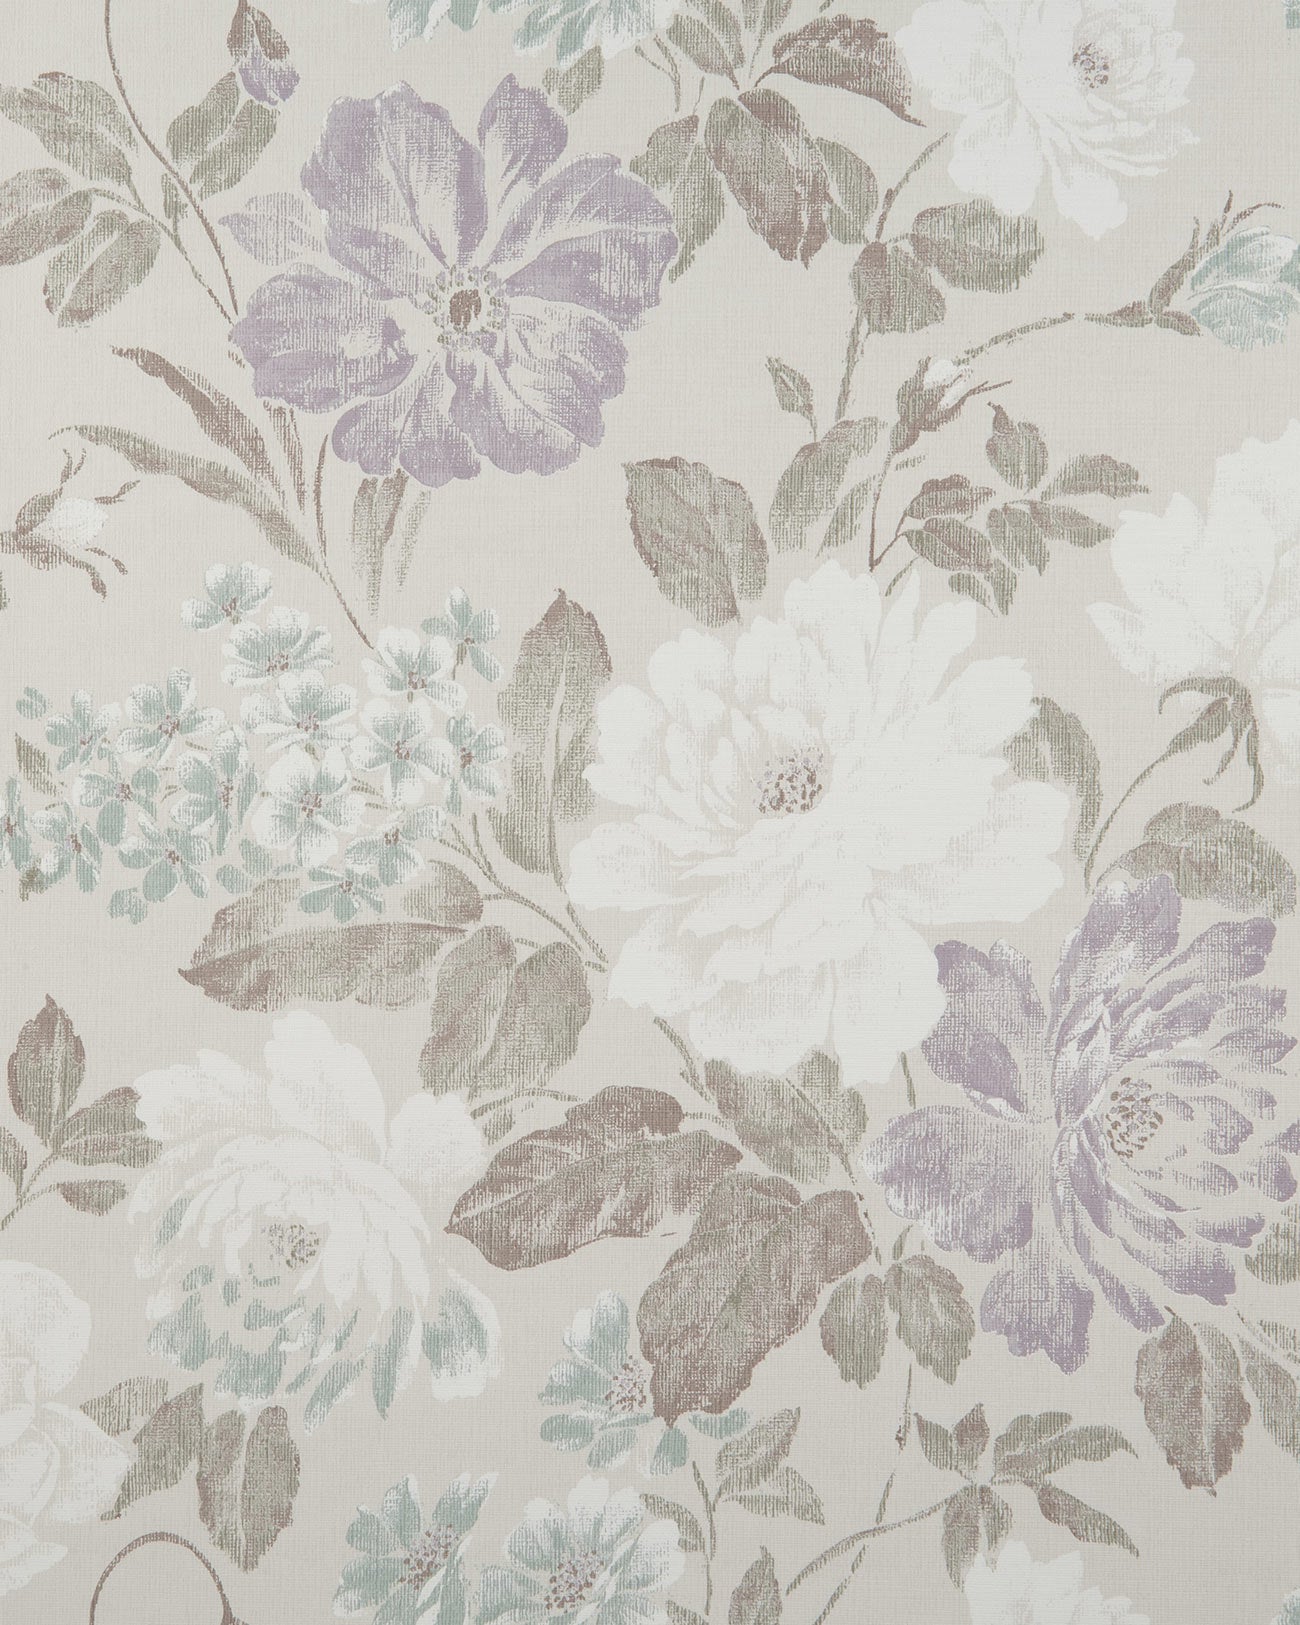 Floral wallpaper Profhome BV919083-DI textured hot embossed non-woven wallpaper with a matt floral design anthracite gray lilac mint 5.33 m2